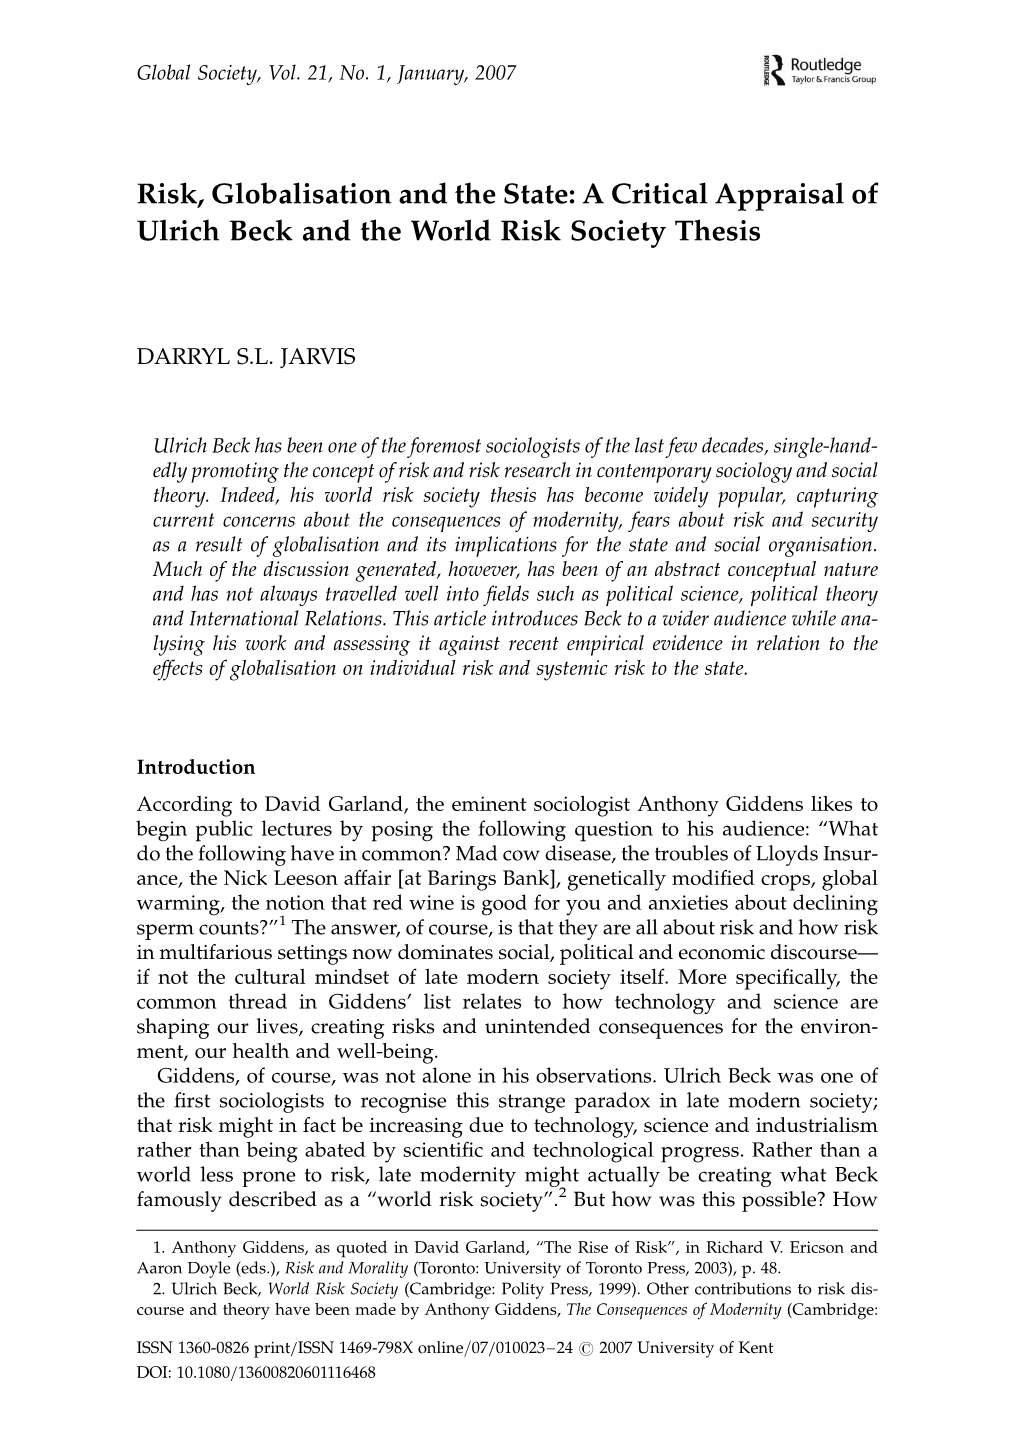 Risk, Globalisation and the State: a Critical Appraisal of Ulrich Beck and the World Risk Society Thesis